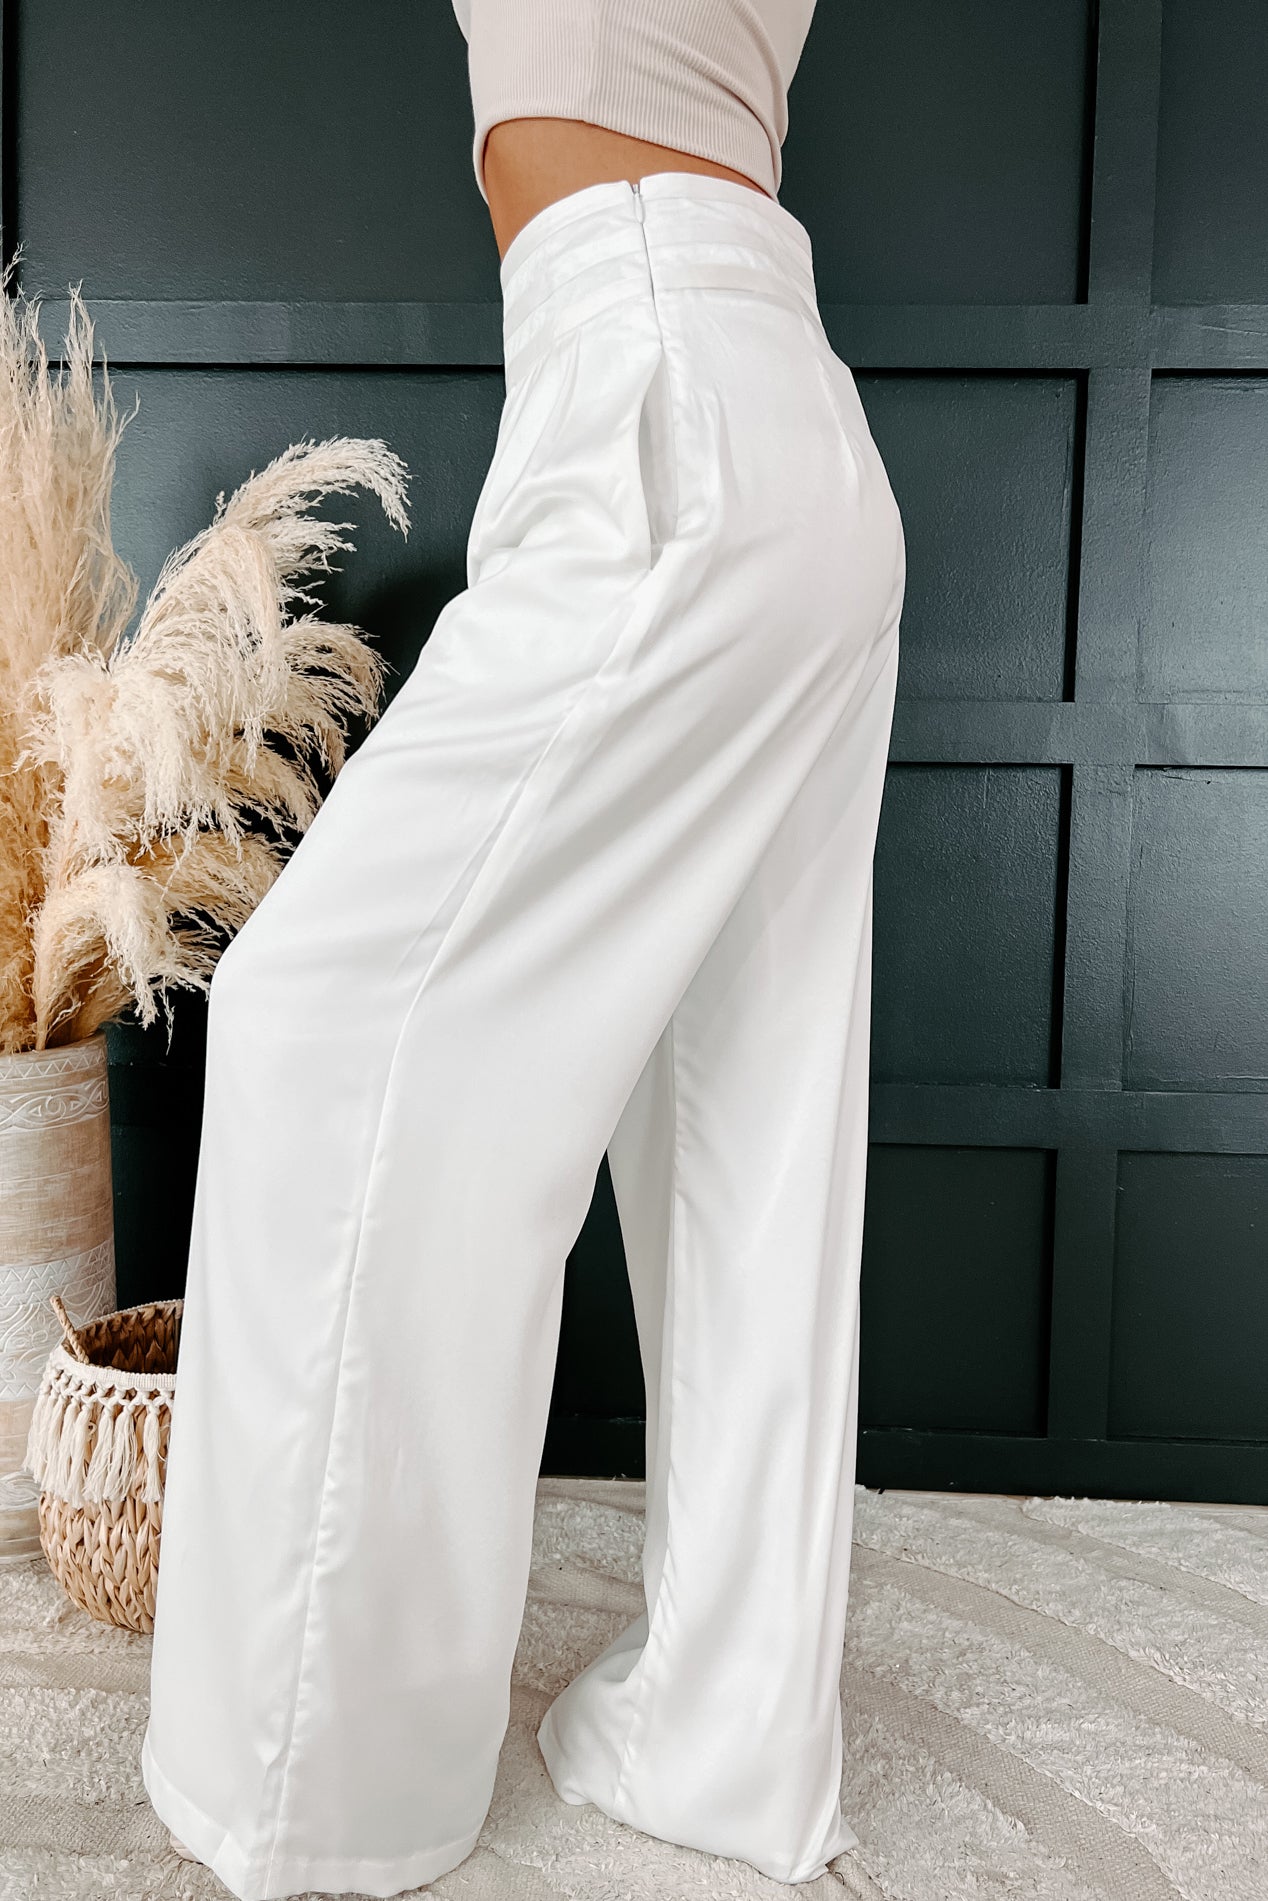 Looma Sequin Pants - High Waisted Super Wide Leg Pants in White | Showpo USA